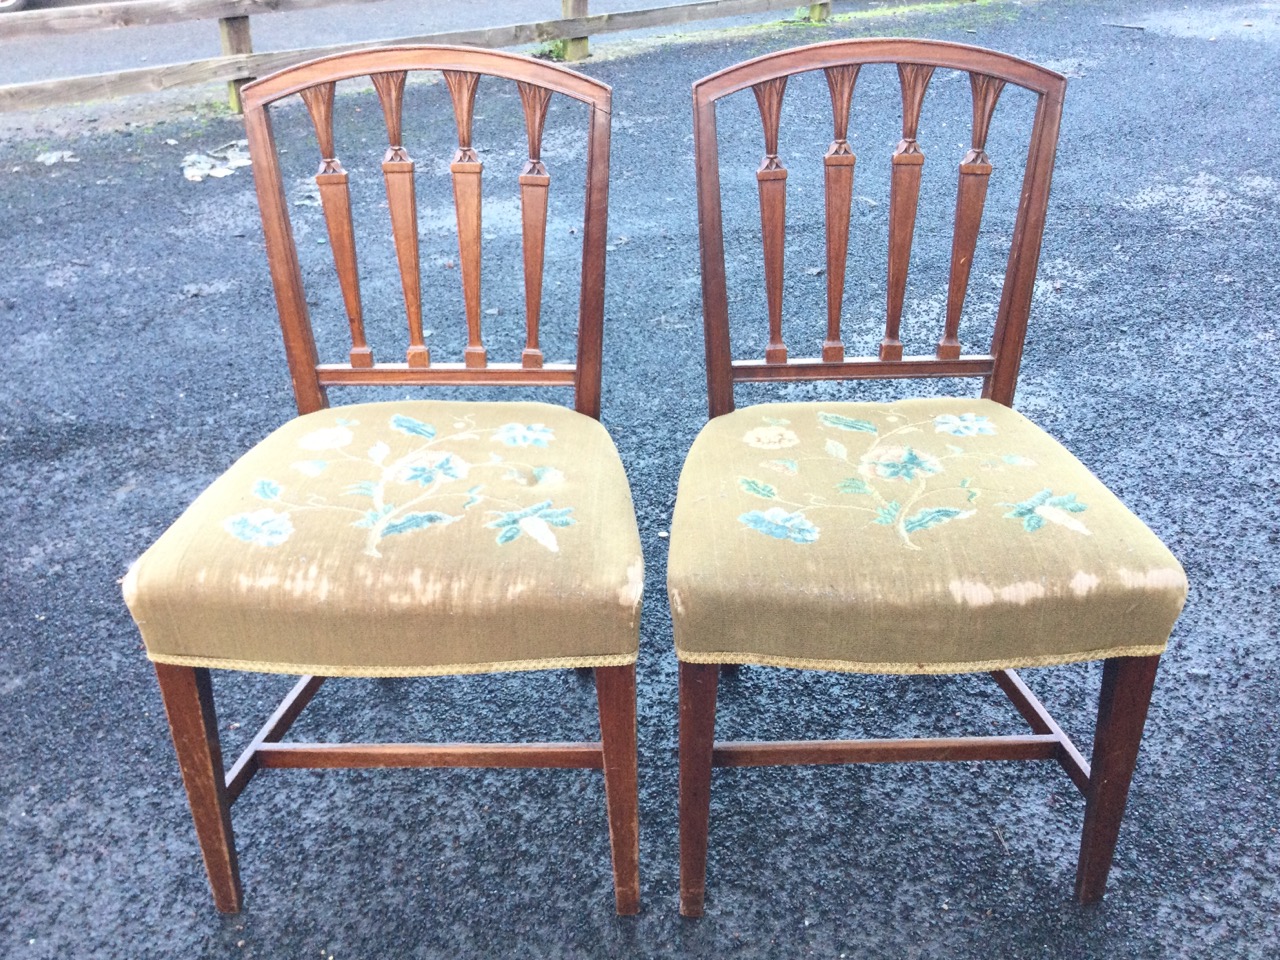 A pair of C19th mahogany Sheraton style chairs with arched backs framing leaf carved tapering - Image 2 of 3